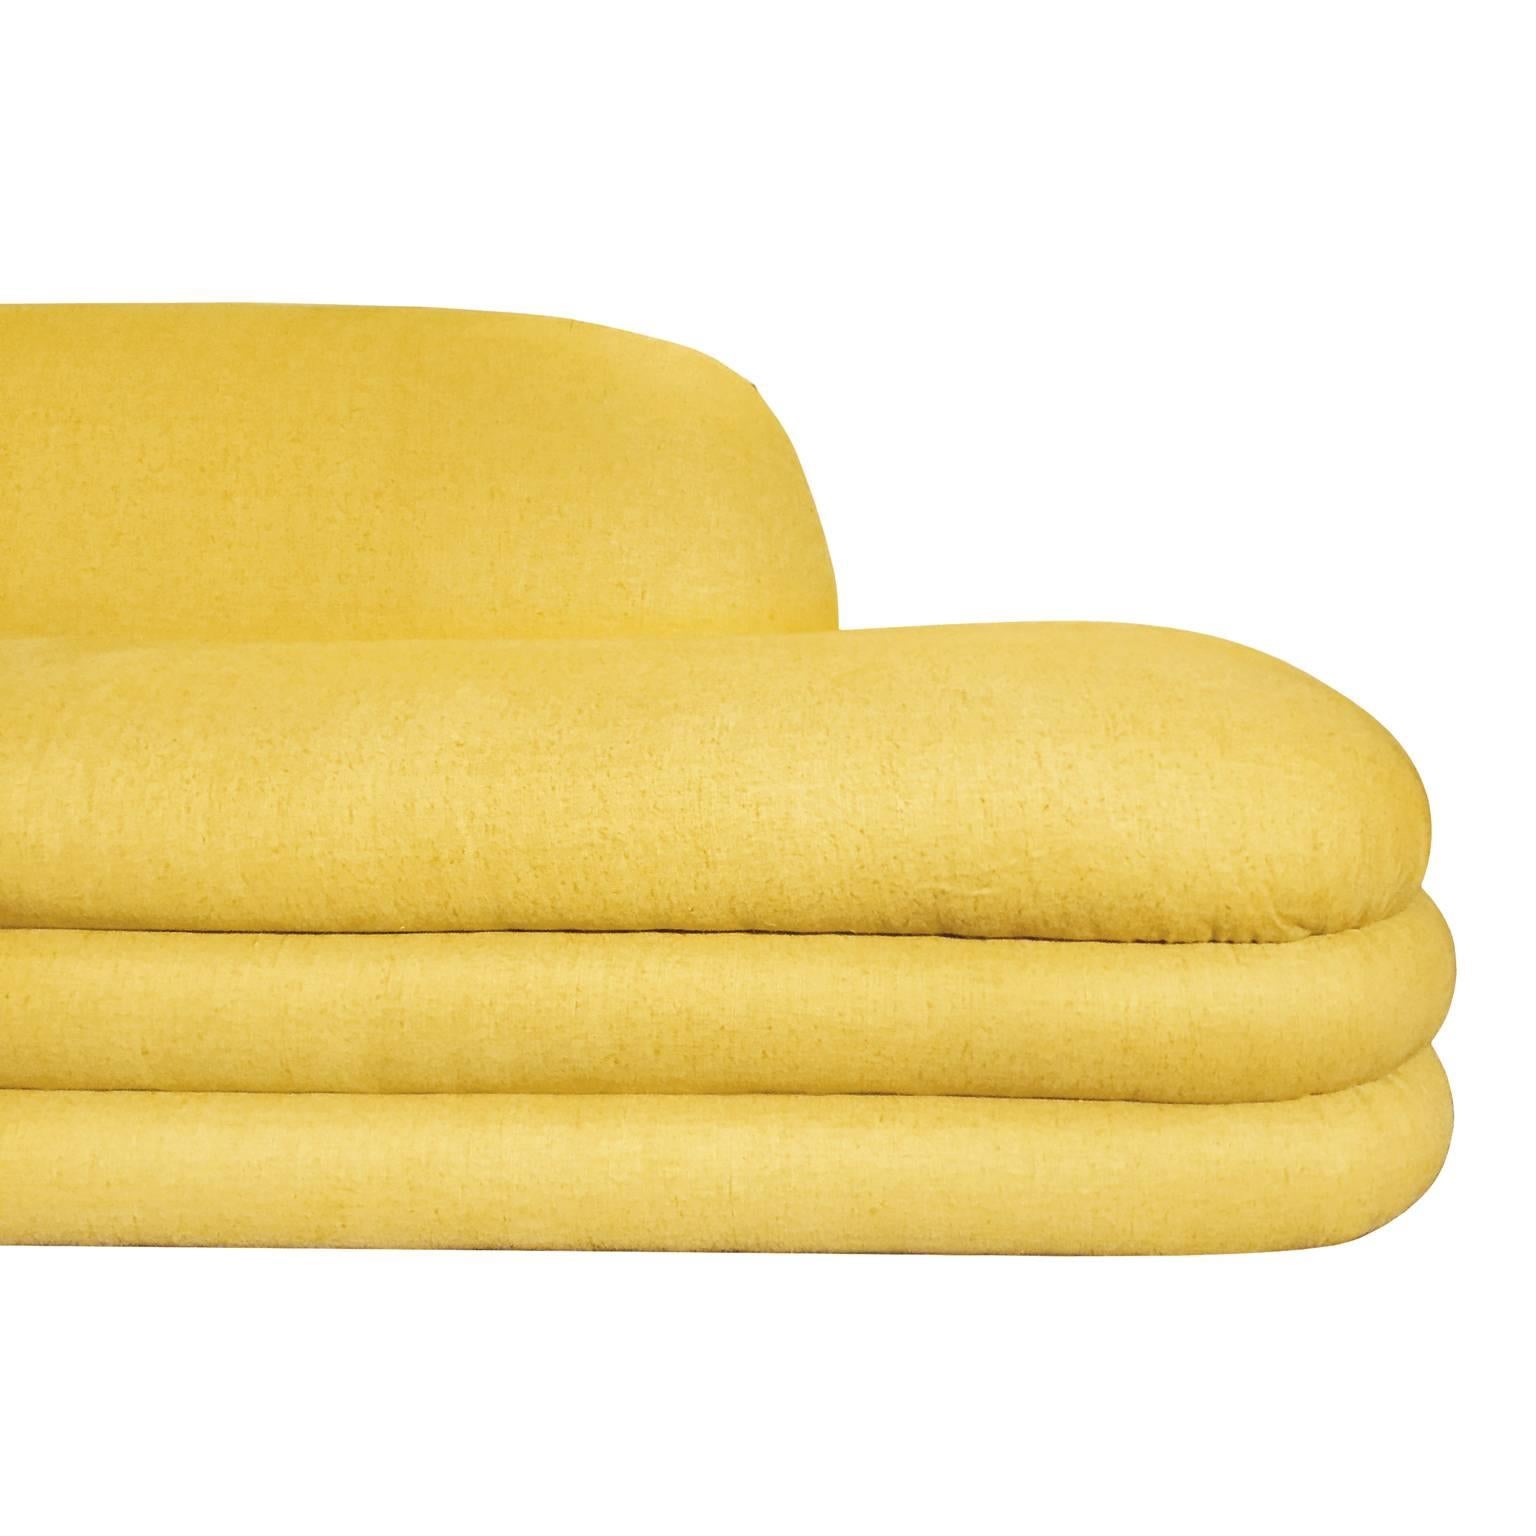 Large curved two-piece sectional sofa with original yellow upholstery. USA, 1970s. 